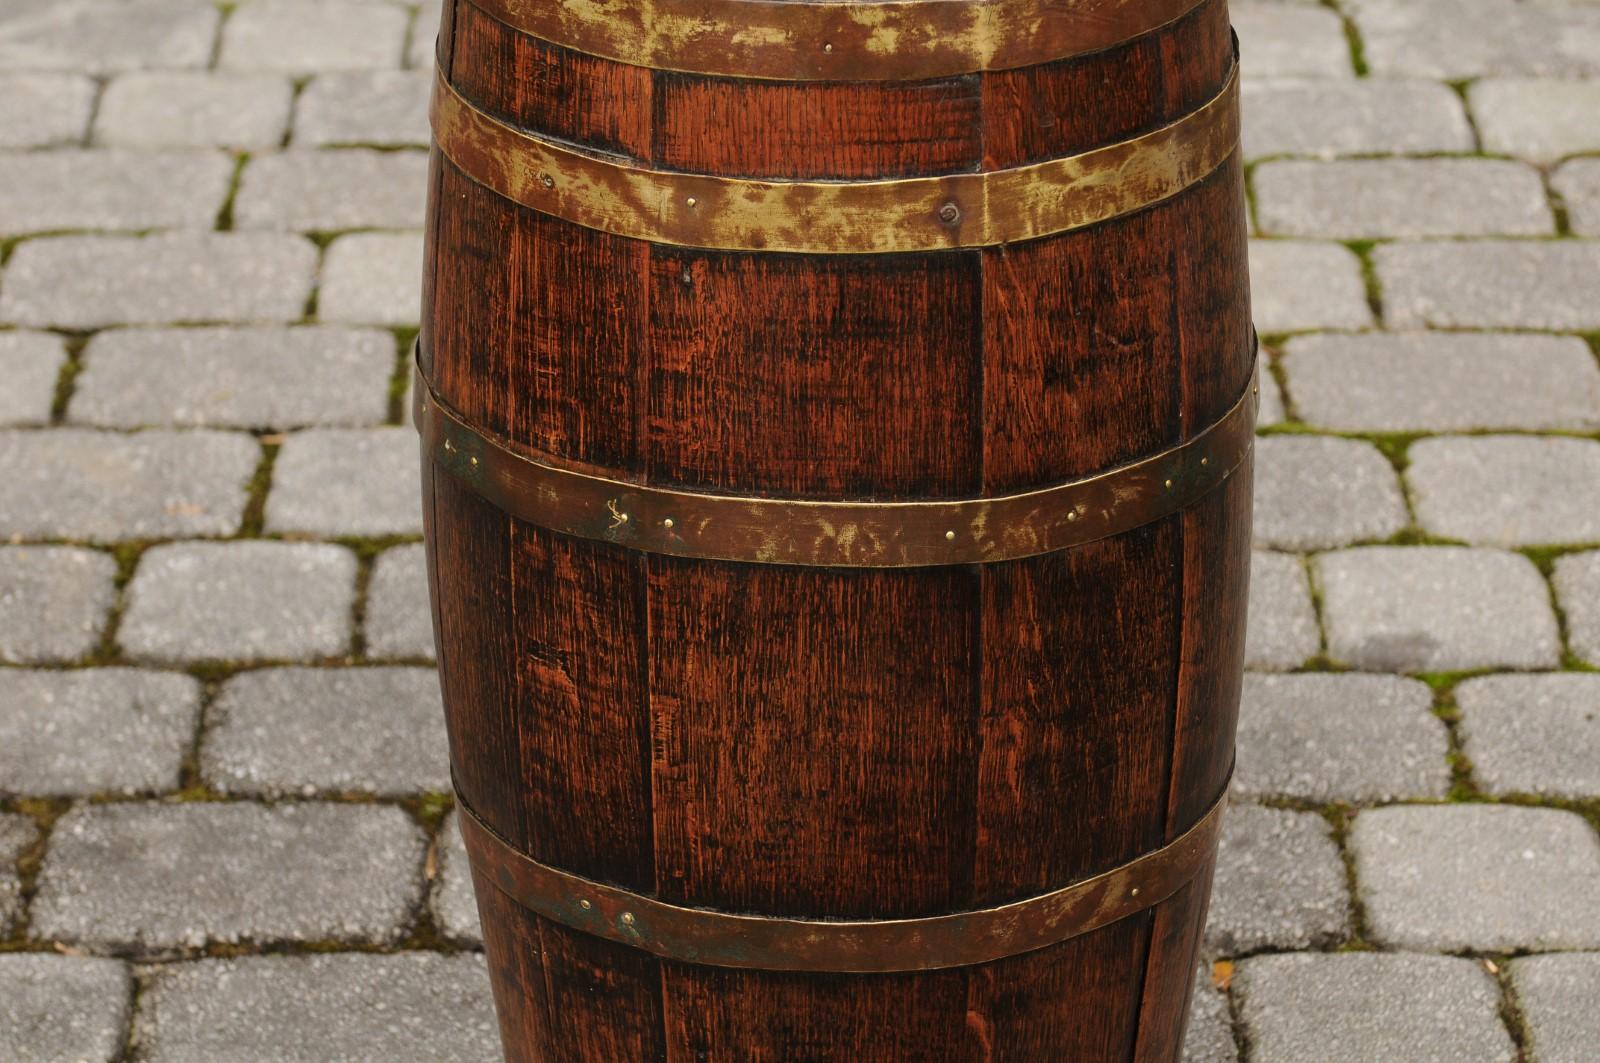 English Slender Rustic Oak Barrel with Brass Braces from the Turn of the Century 1